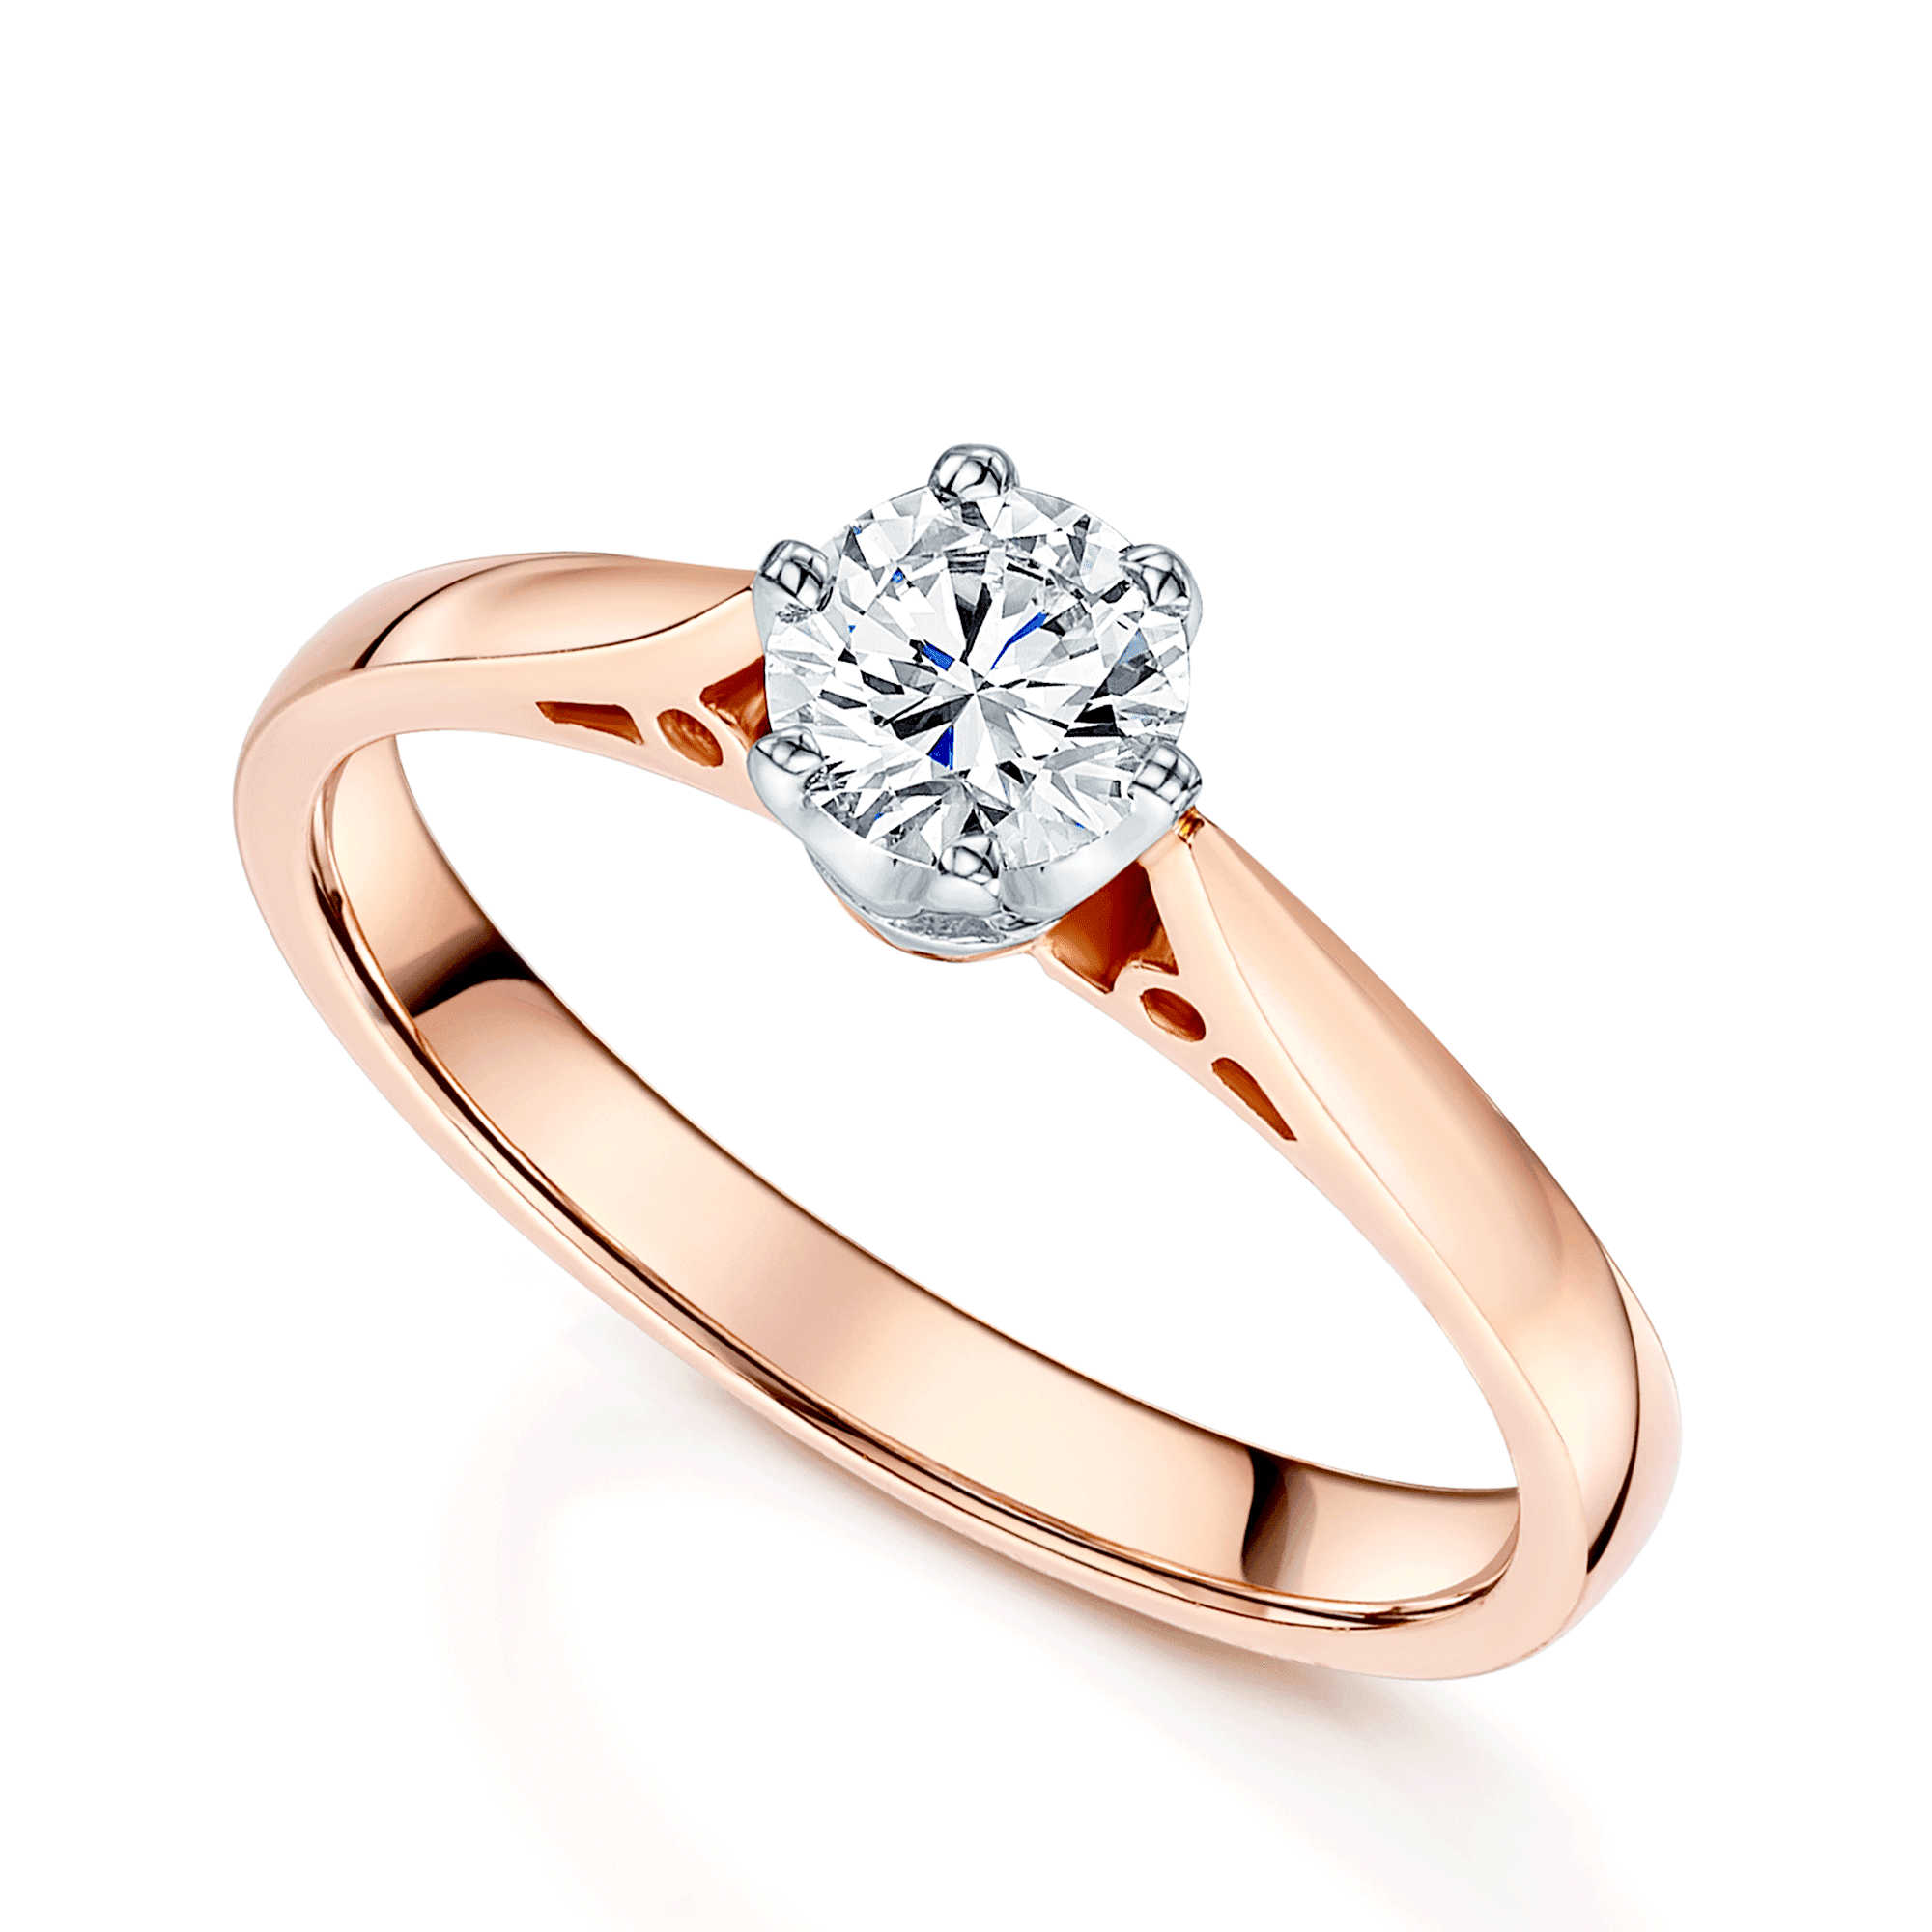 18ct Rose Gold 0.43 Carat Round Brilliant Cut Diamond Solitaire Ring In A Six Claw Setting